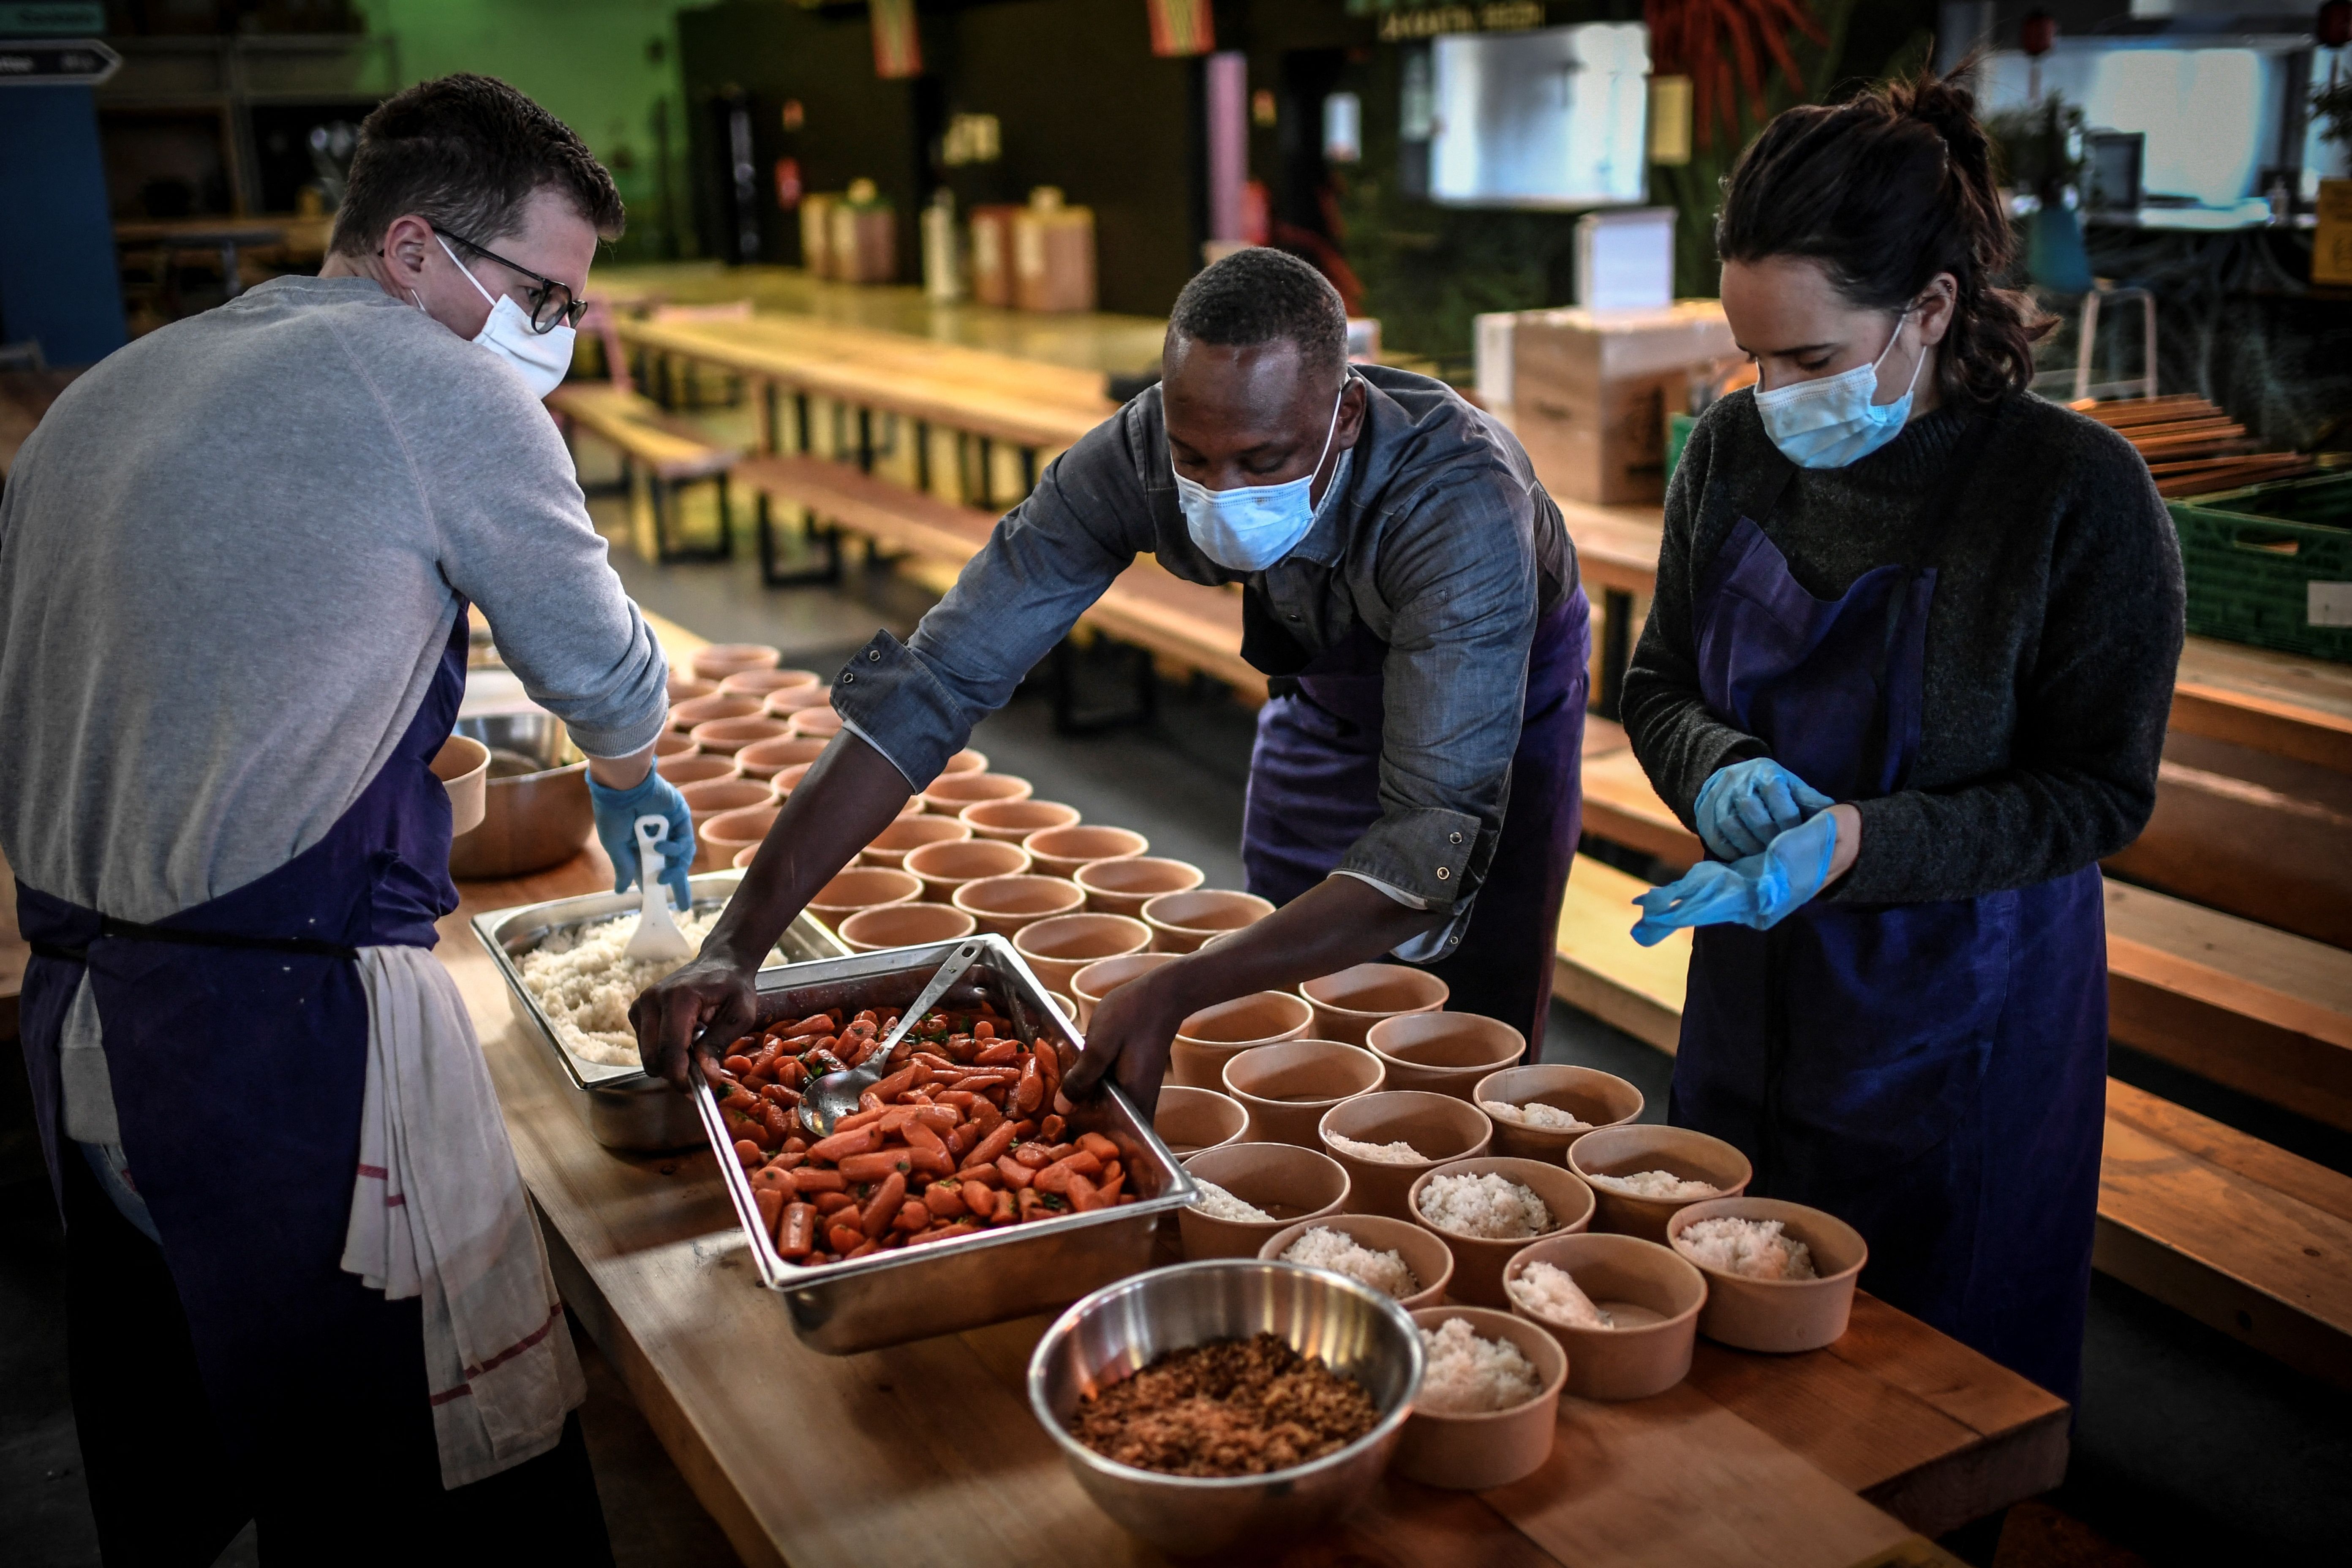 Volunteers prepare food for students in need prior to a food distribution to help the most vulnerable people on March 9, 2021 in Paris.